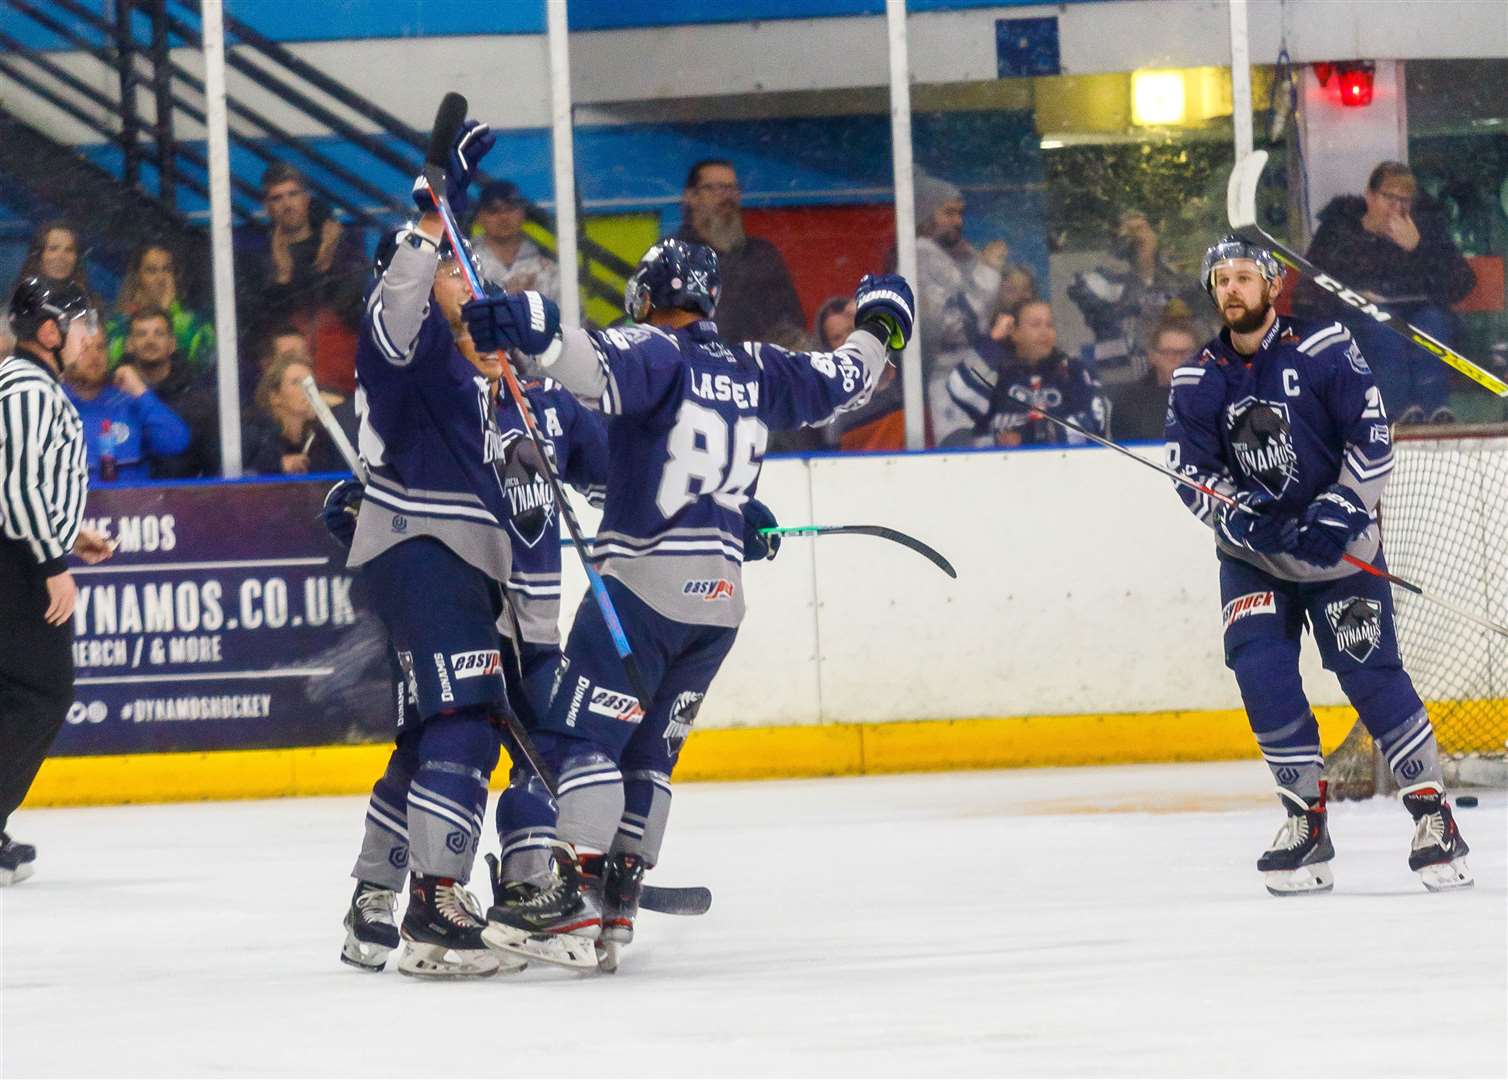 First home goal celebration, scored by Stanislav Lascek and assisted by Thomas Soar Picture: David Trevallion